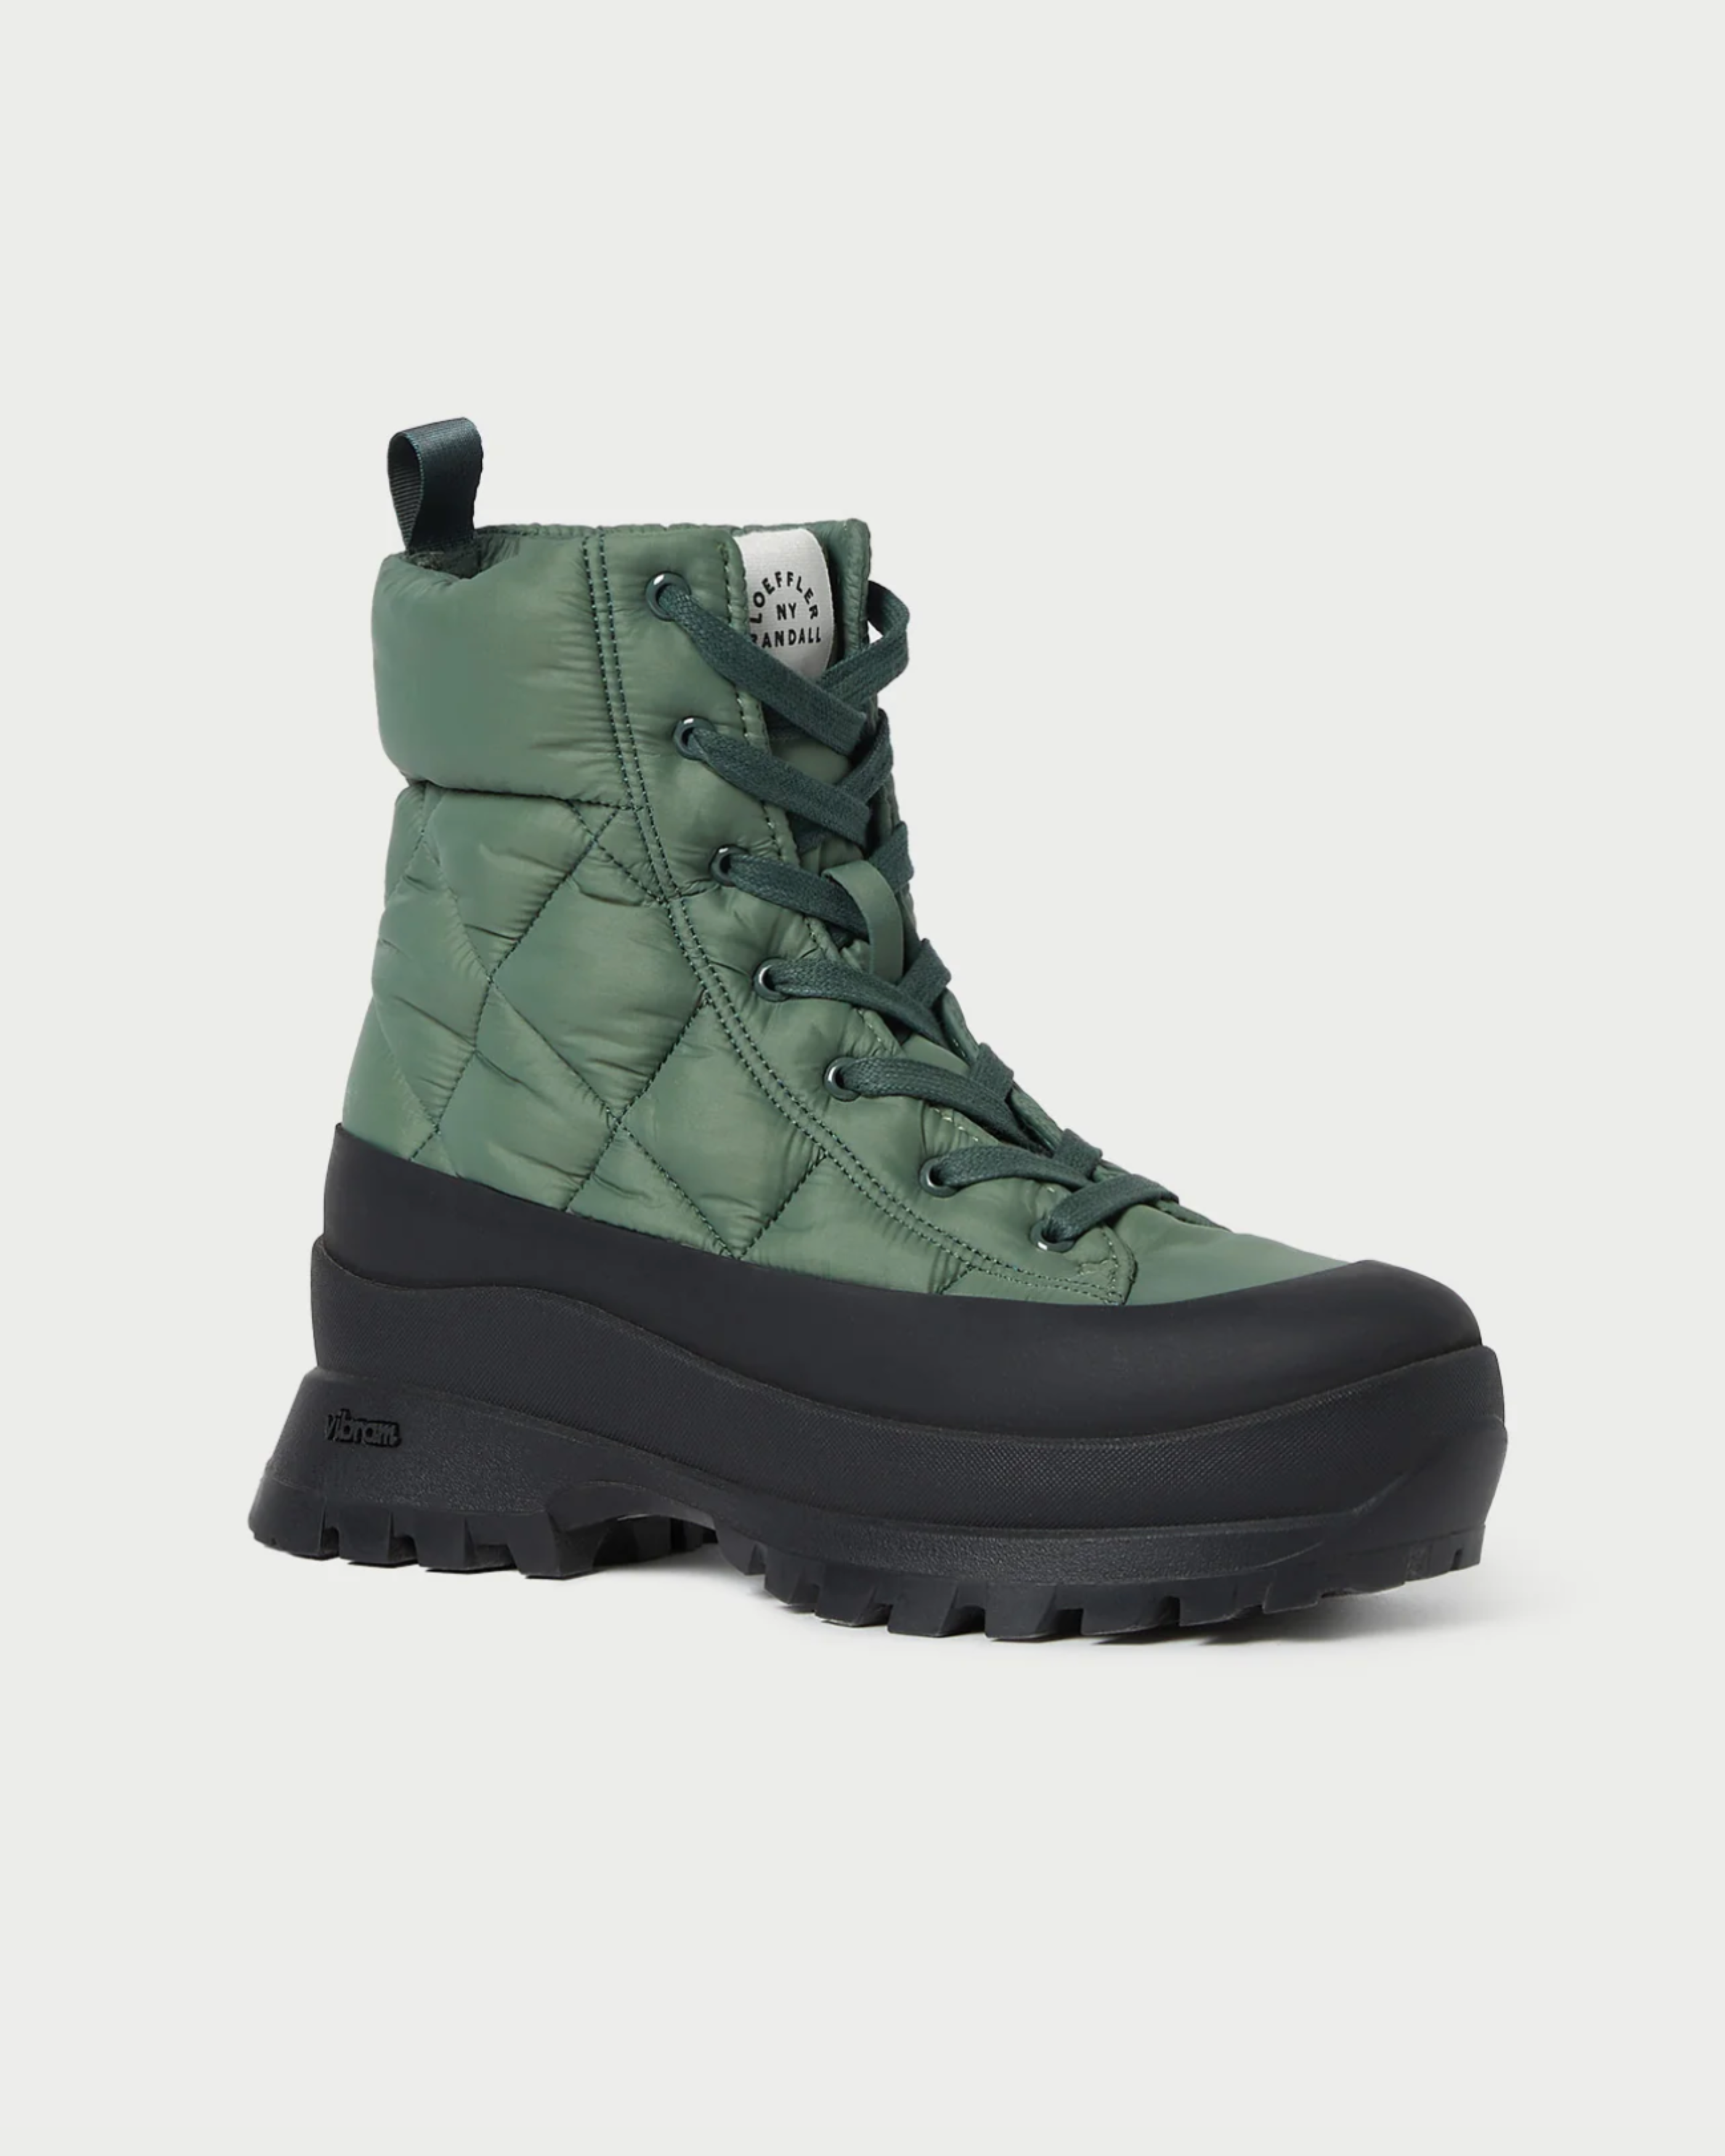 Loeffler Randall Davey Puffy Quilted Lace Up Boot in Dark Green